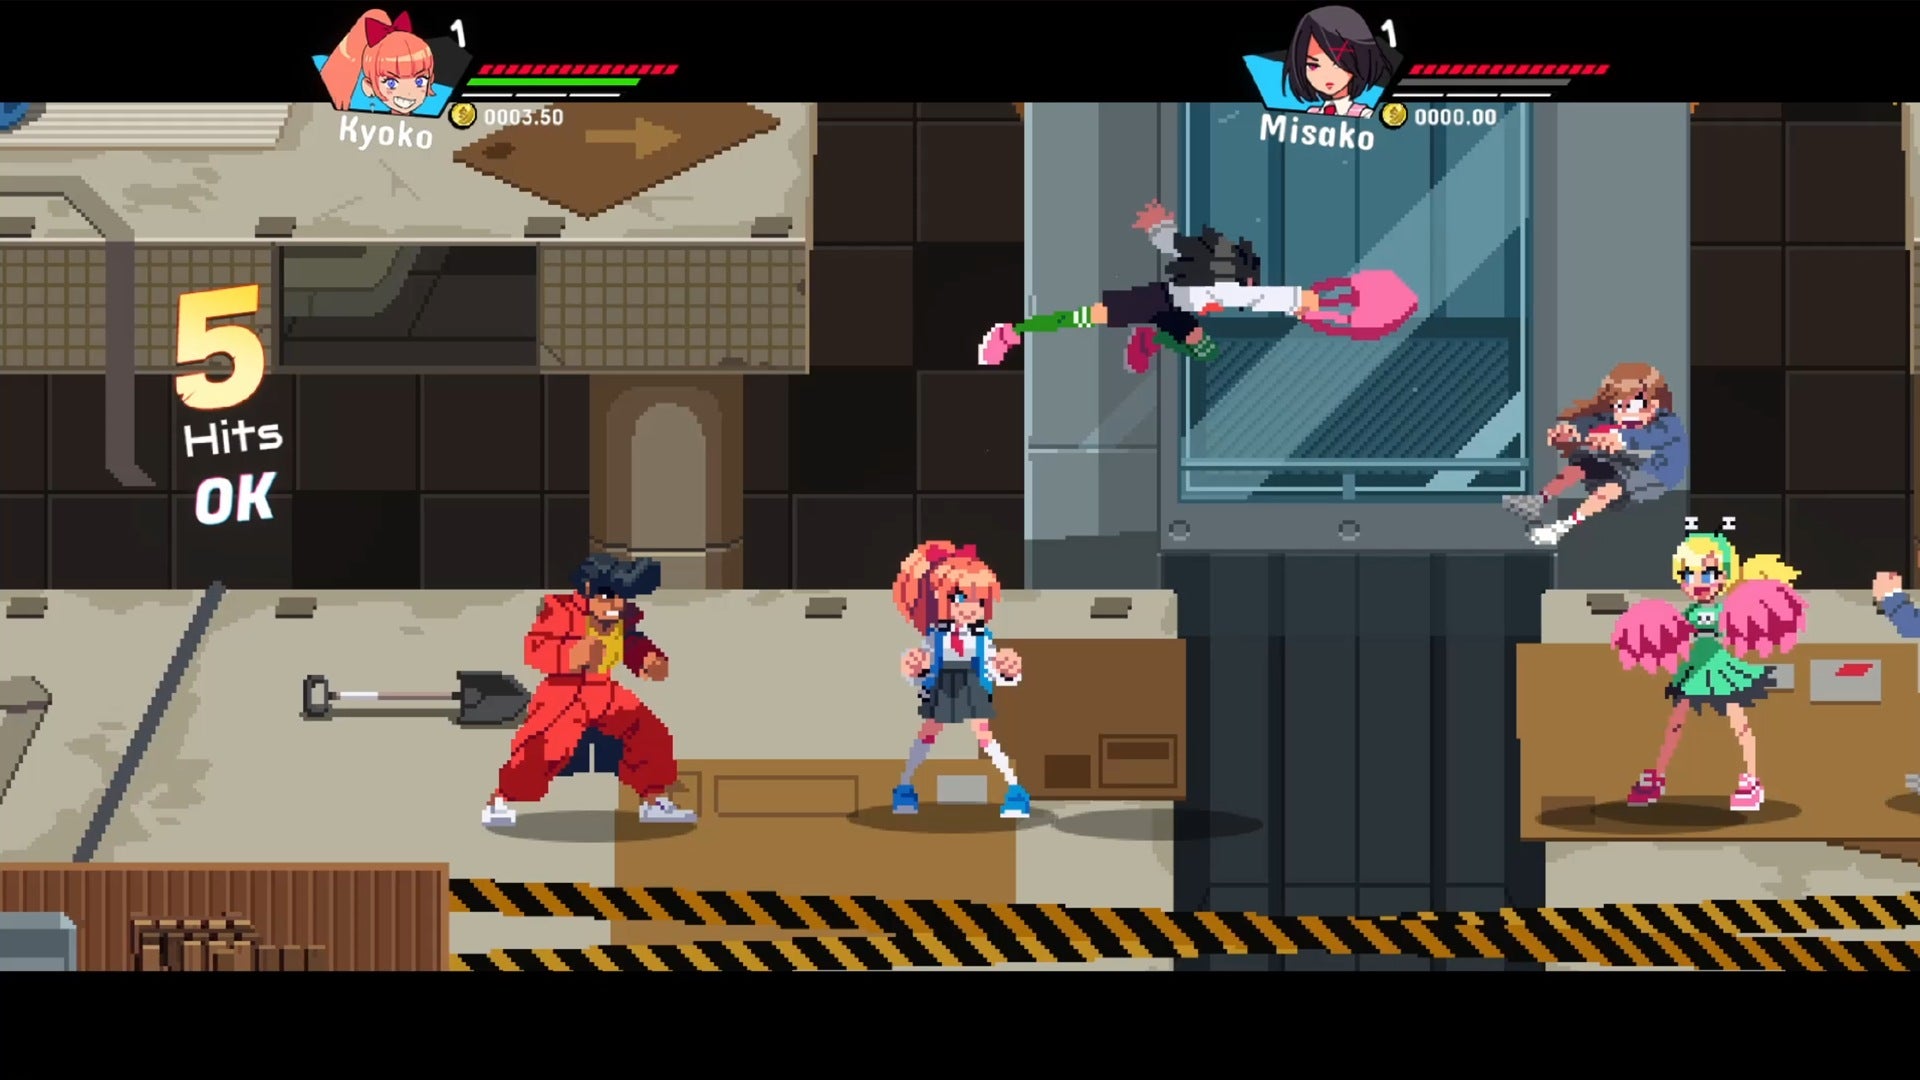 River City Girls Sequel Aims To Perfect That Juicy Fusion Of Anime And Wrestling